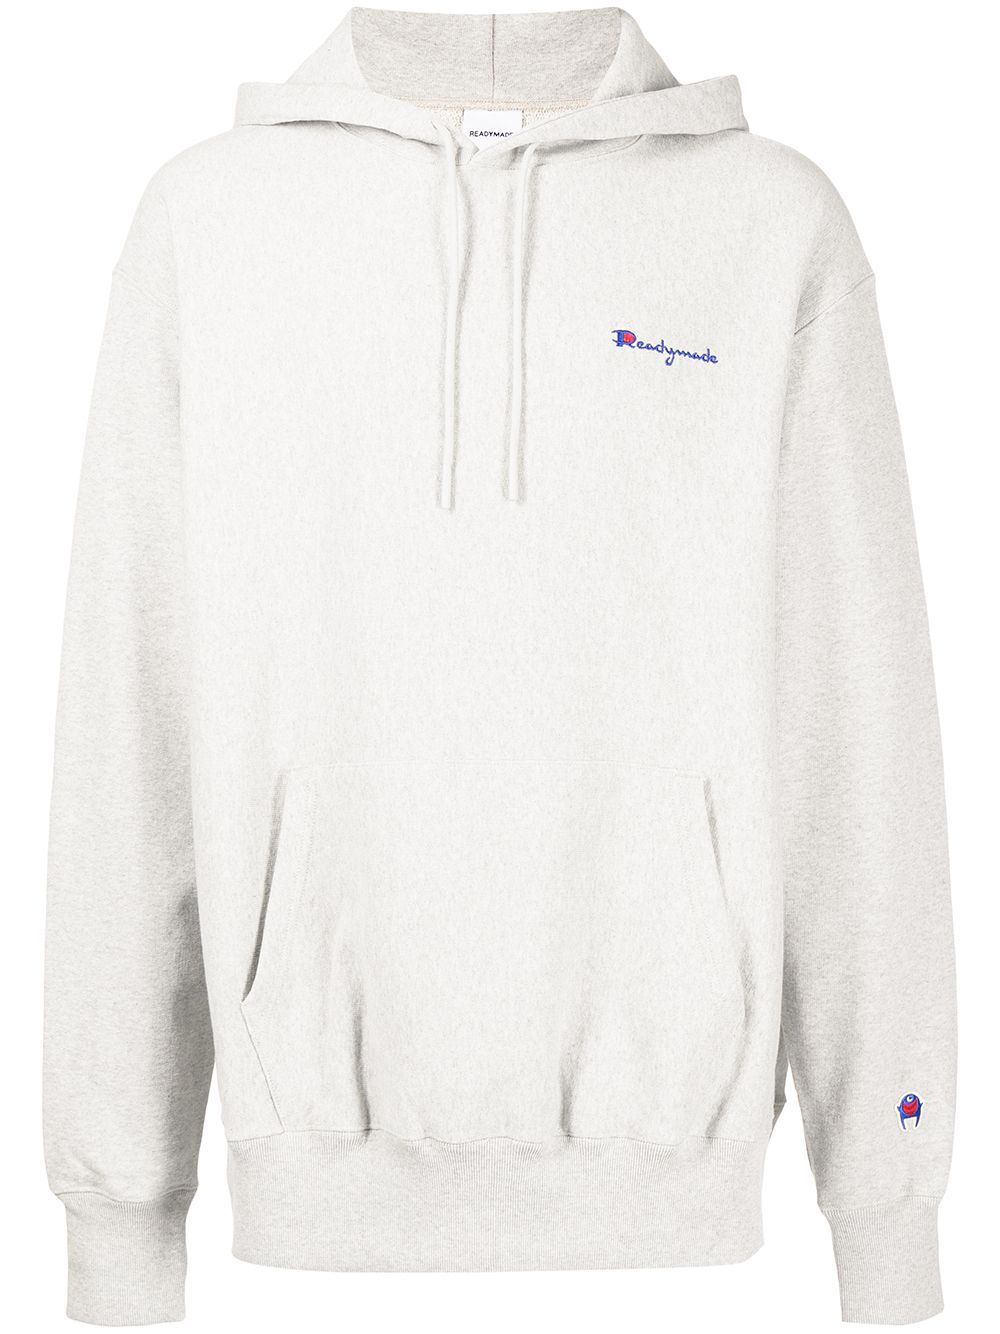 Readymade embroidered logo long-sleeve hoodie - Grey von Readymade